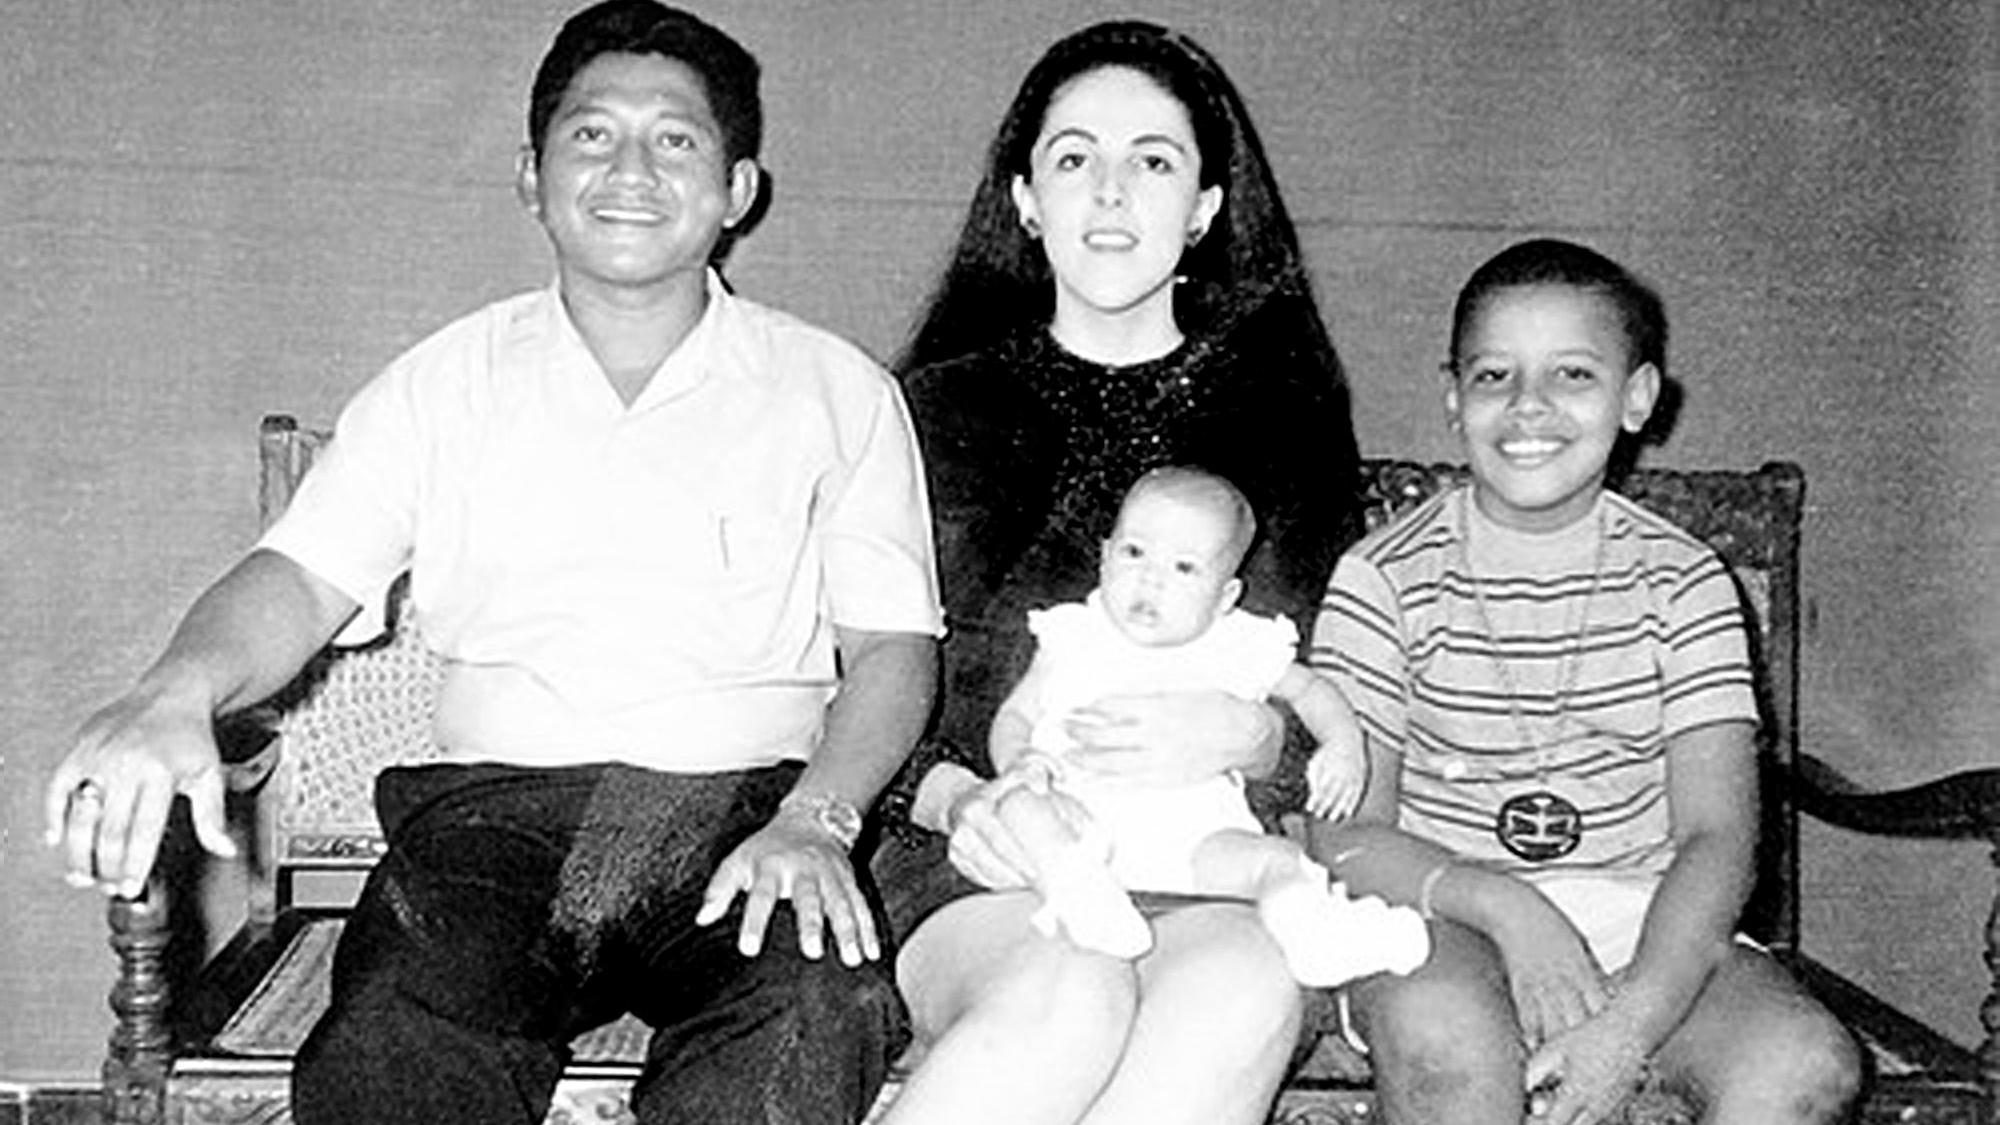 Democratic Presidential candidate Sen. Barack Obama (D-IL) is pictured with his mother Ann (C), his half-sister Maya Soetoro, and his stepfather Lolo Soetoro (L) in an undated childhood photo taken in Jakarta, Indonesia. Obama lived and attended loca